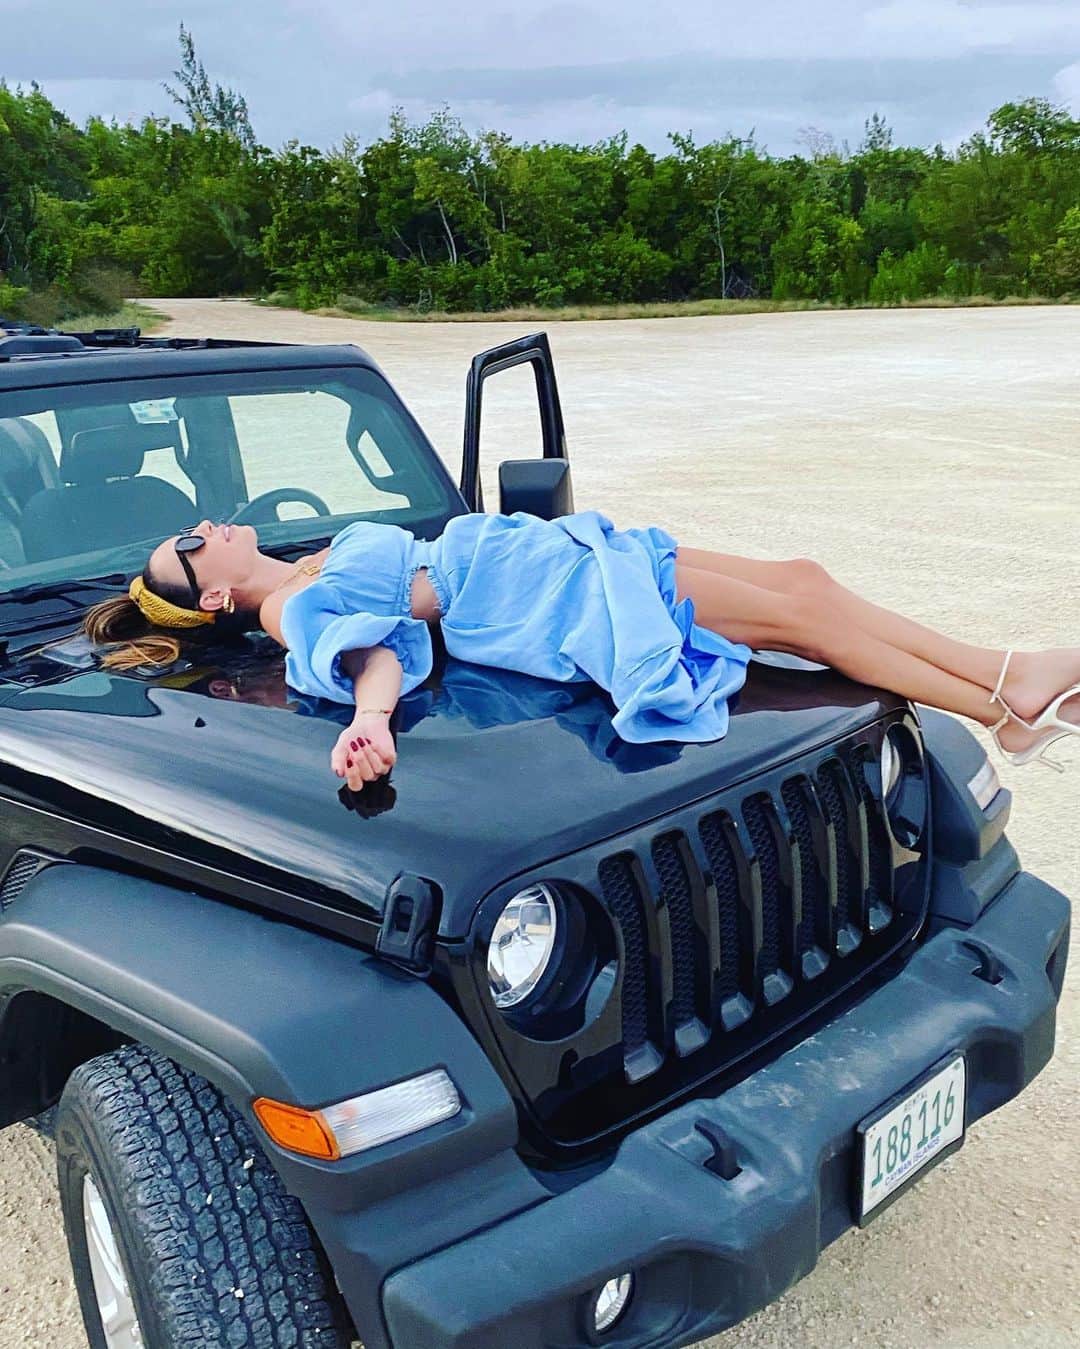 Elizabeth Chambers Hammerのインスタグラム：「Celebrating day 457 of Christmas break coming to an end with 2 hours of off-roading, which is both the babes’ newest favorite hobby and oddly exhausting. Happy week, bbs. 💙」